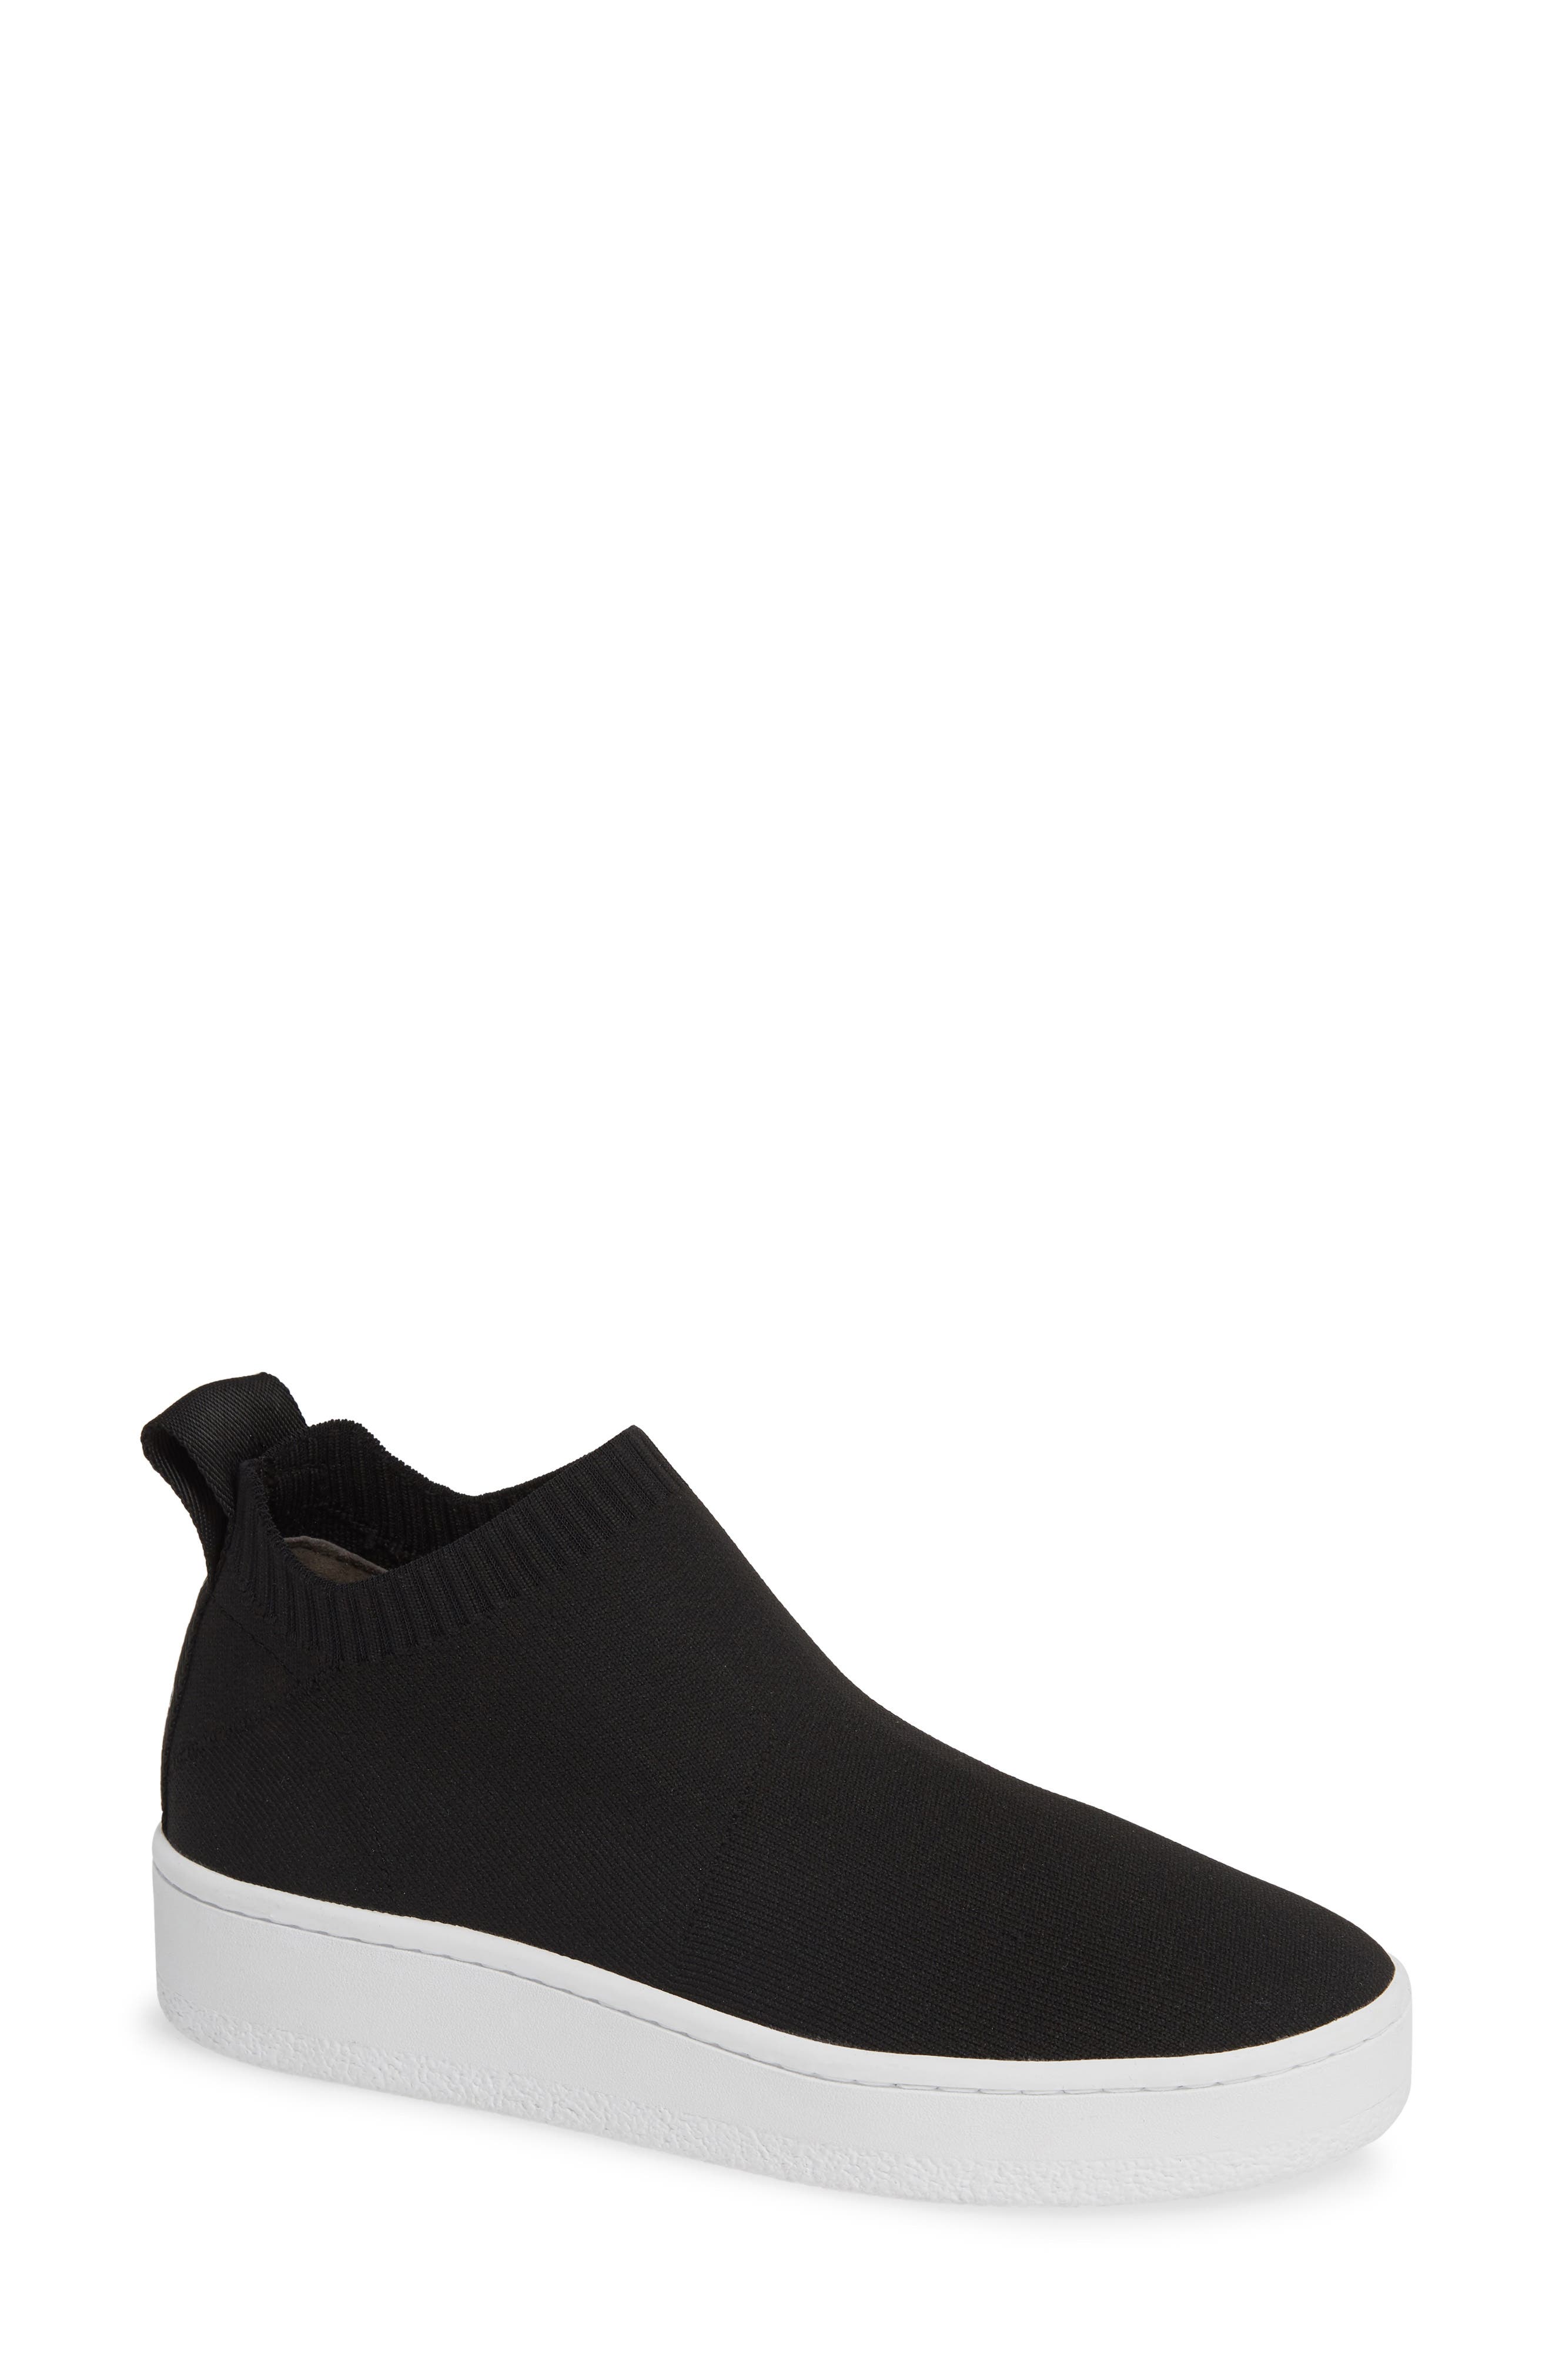 rag and bone orion sneakers